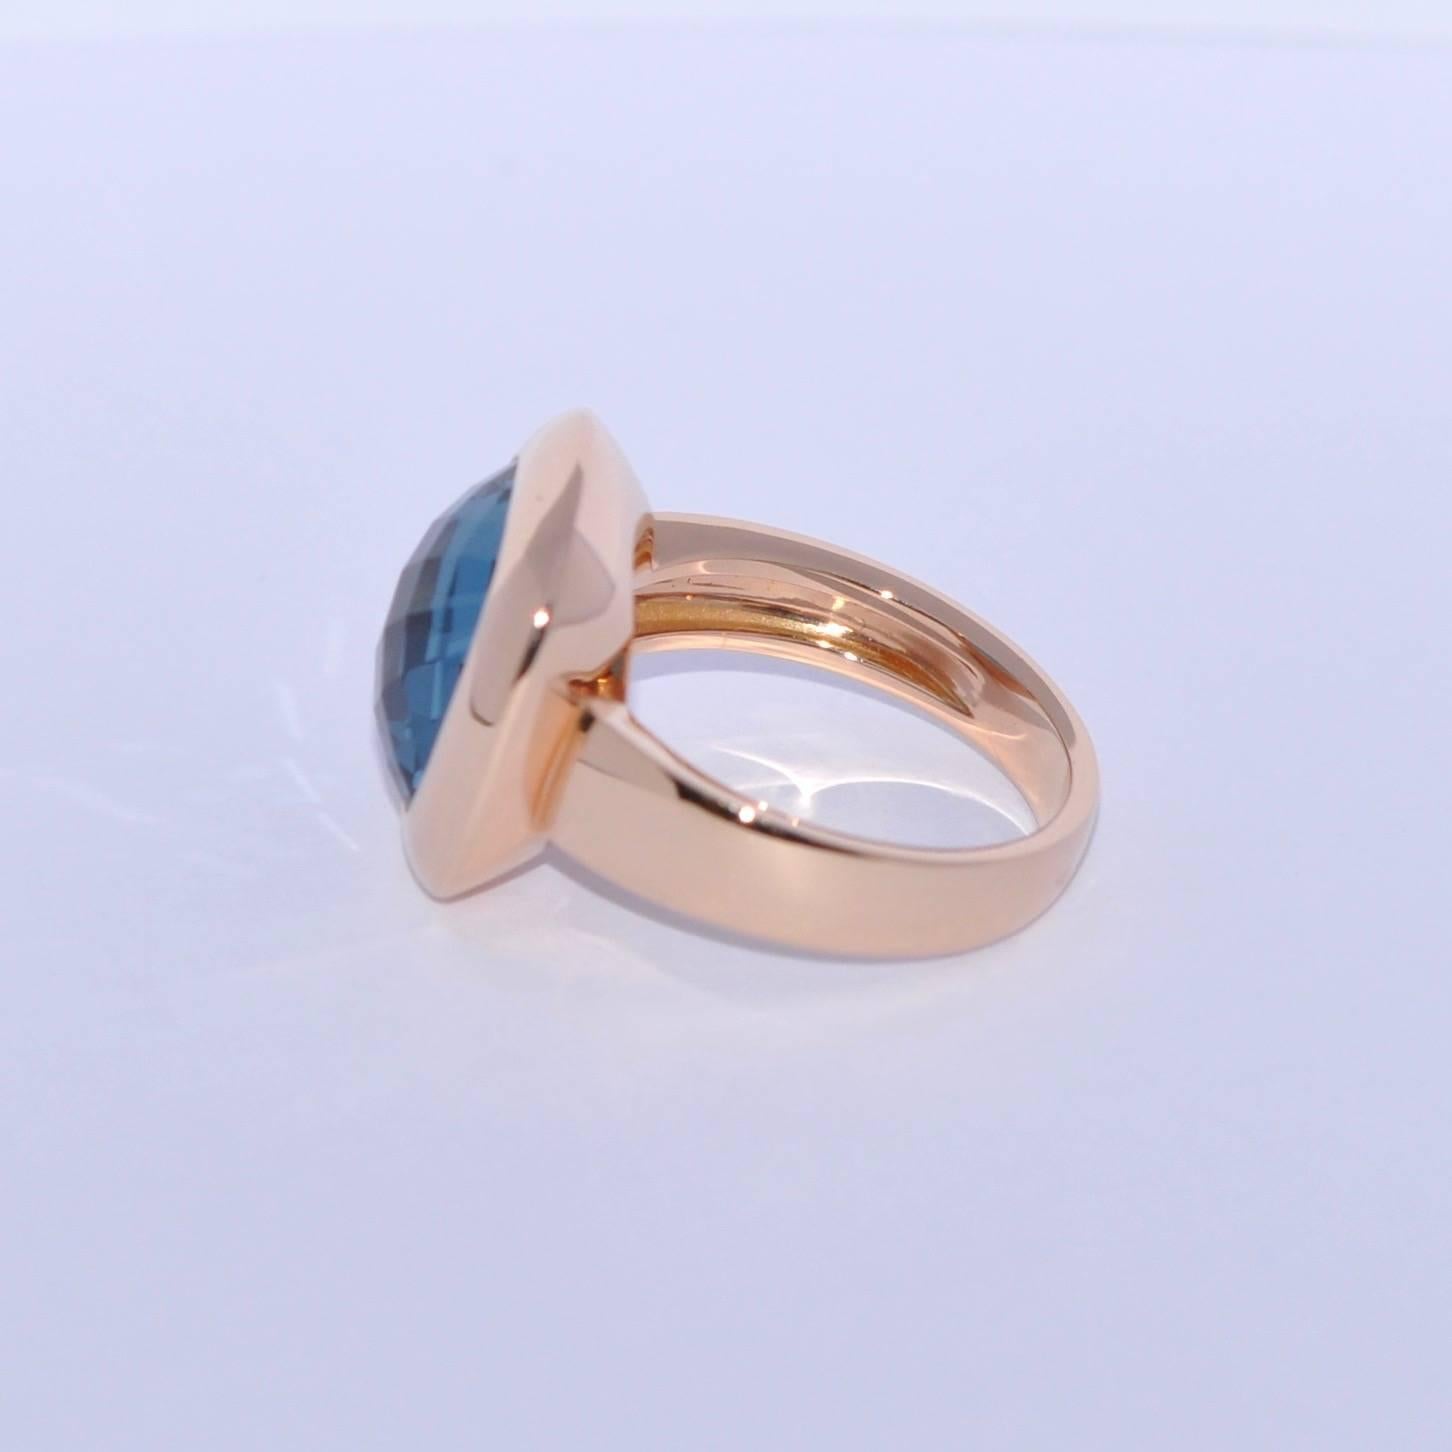 Discover this Lagoon Quartz and Rose Gold 18 Carat Fashion Ring.
Blue Lagoon Quartz
Rose Gold 18 Carat
French Size 52 3/4
US Size 6 1/2